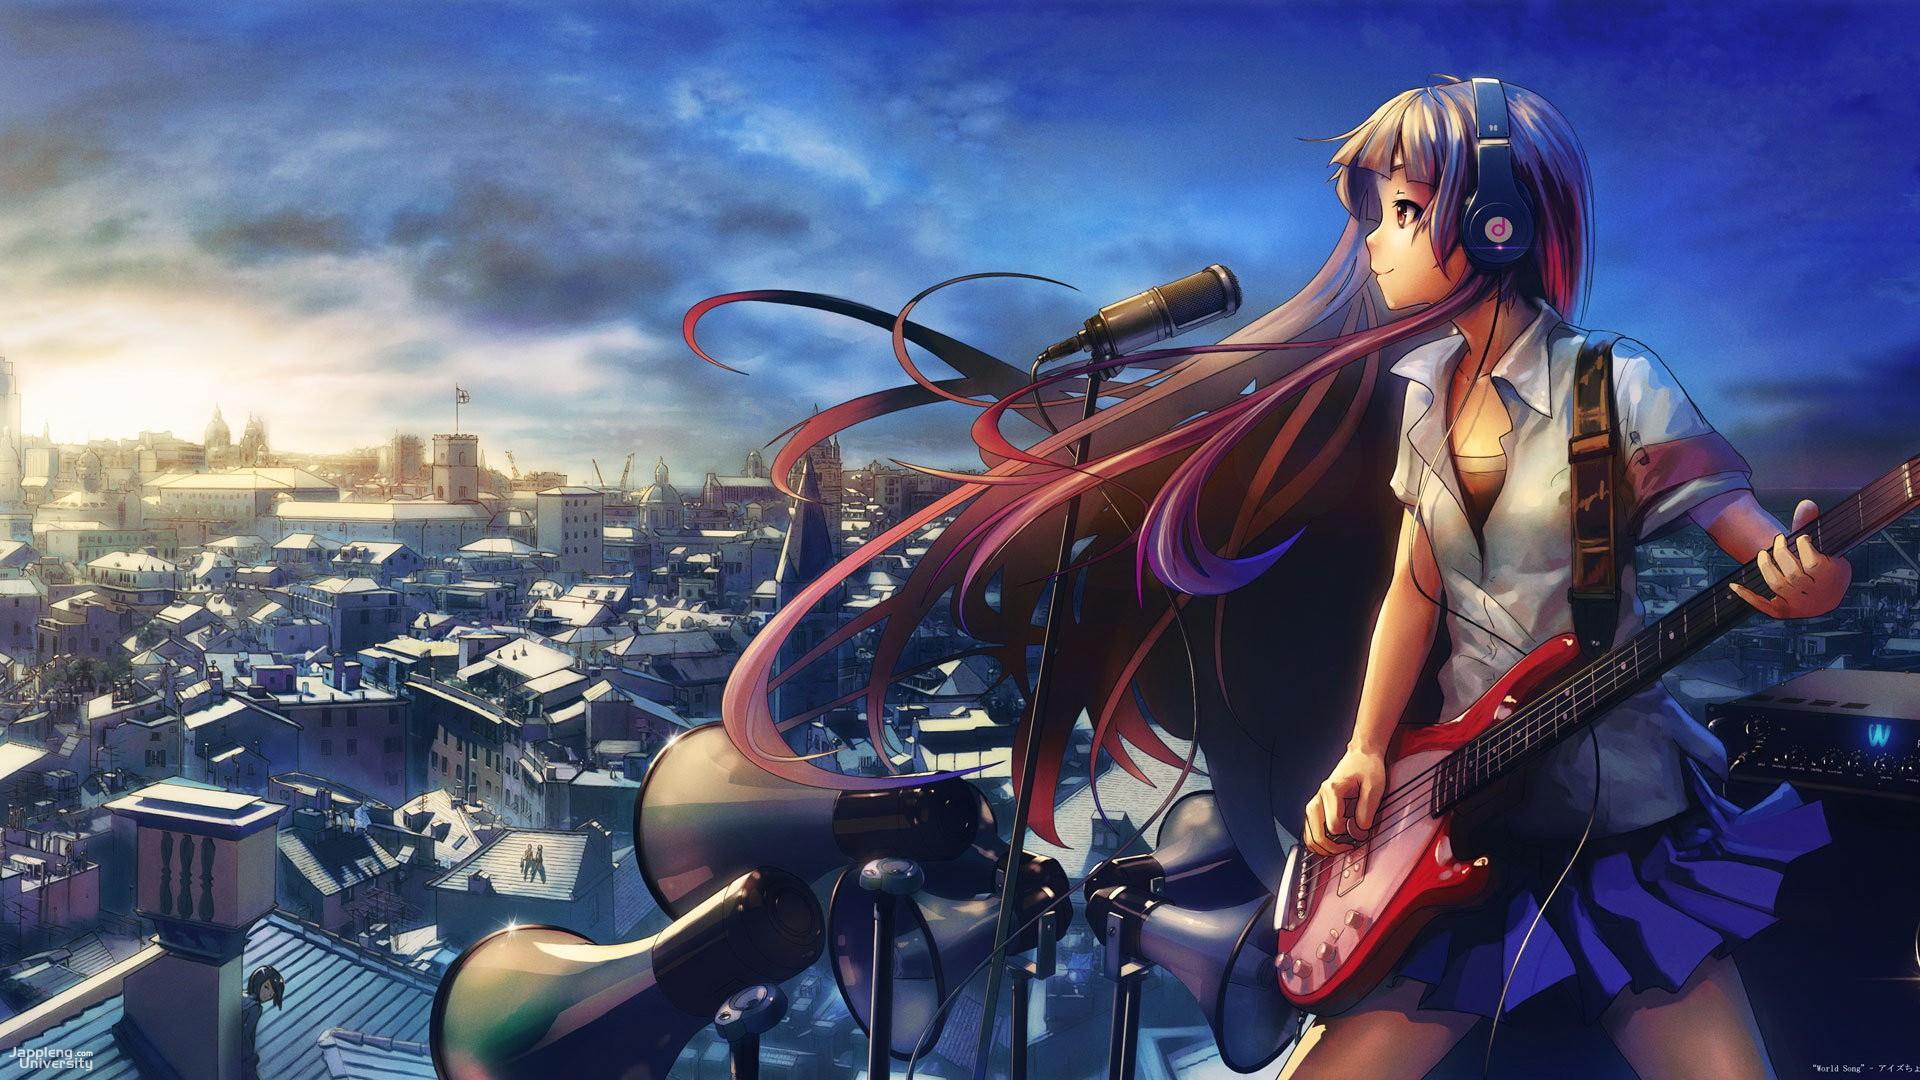 High Resolution Anime Wallpaper Free High Resolution Anime Background